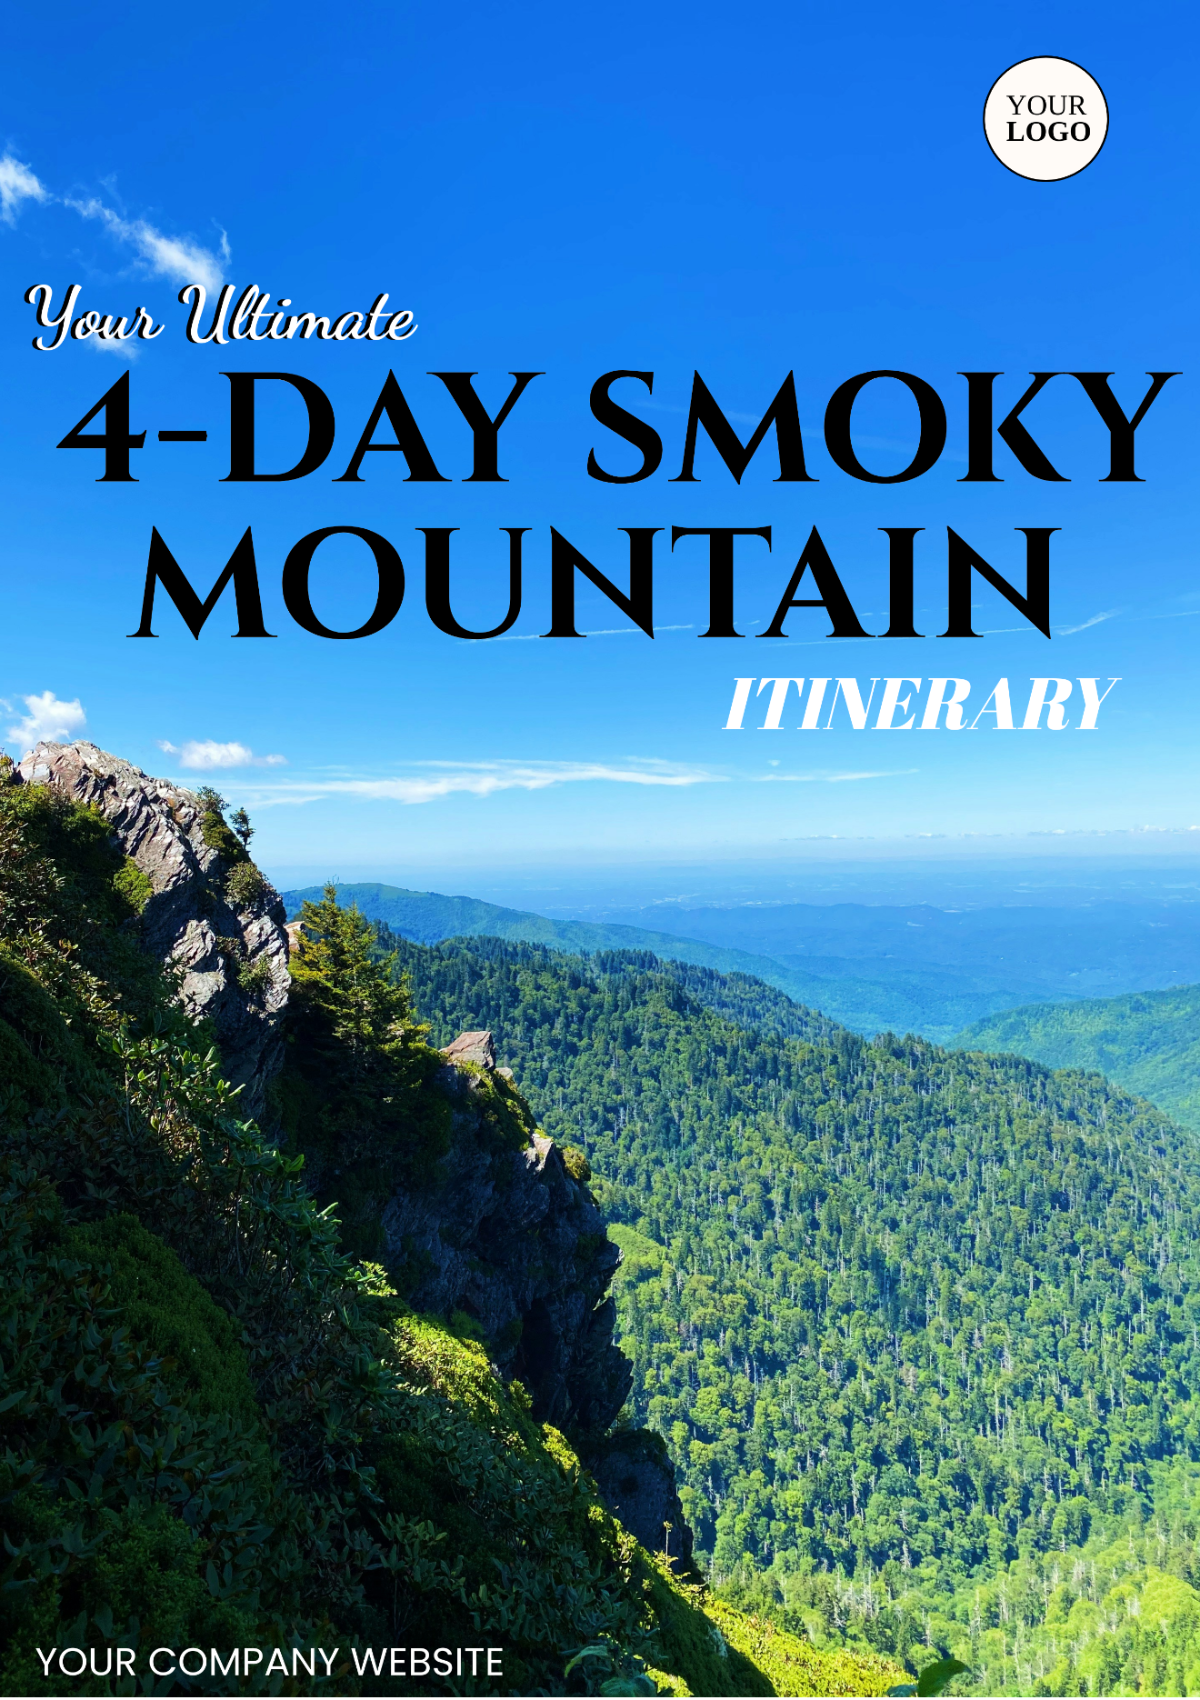 4 Day Smoky Mountain Itinerary Template